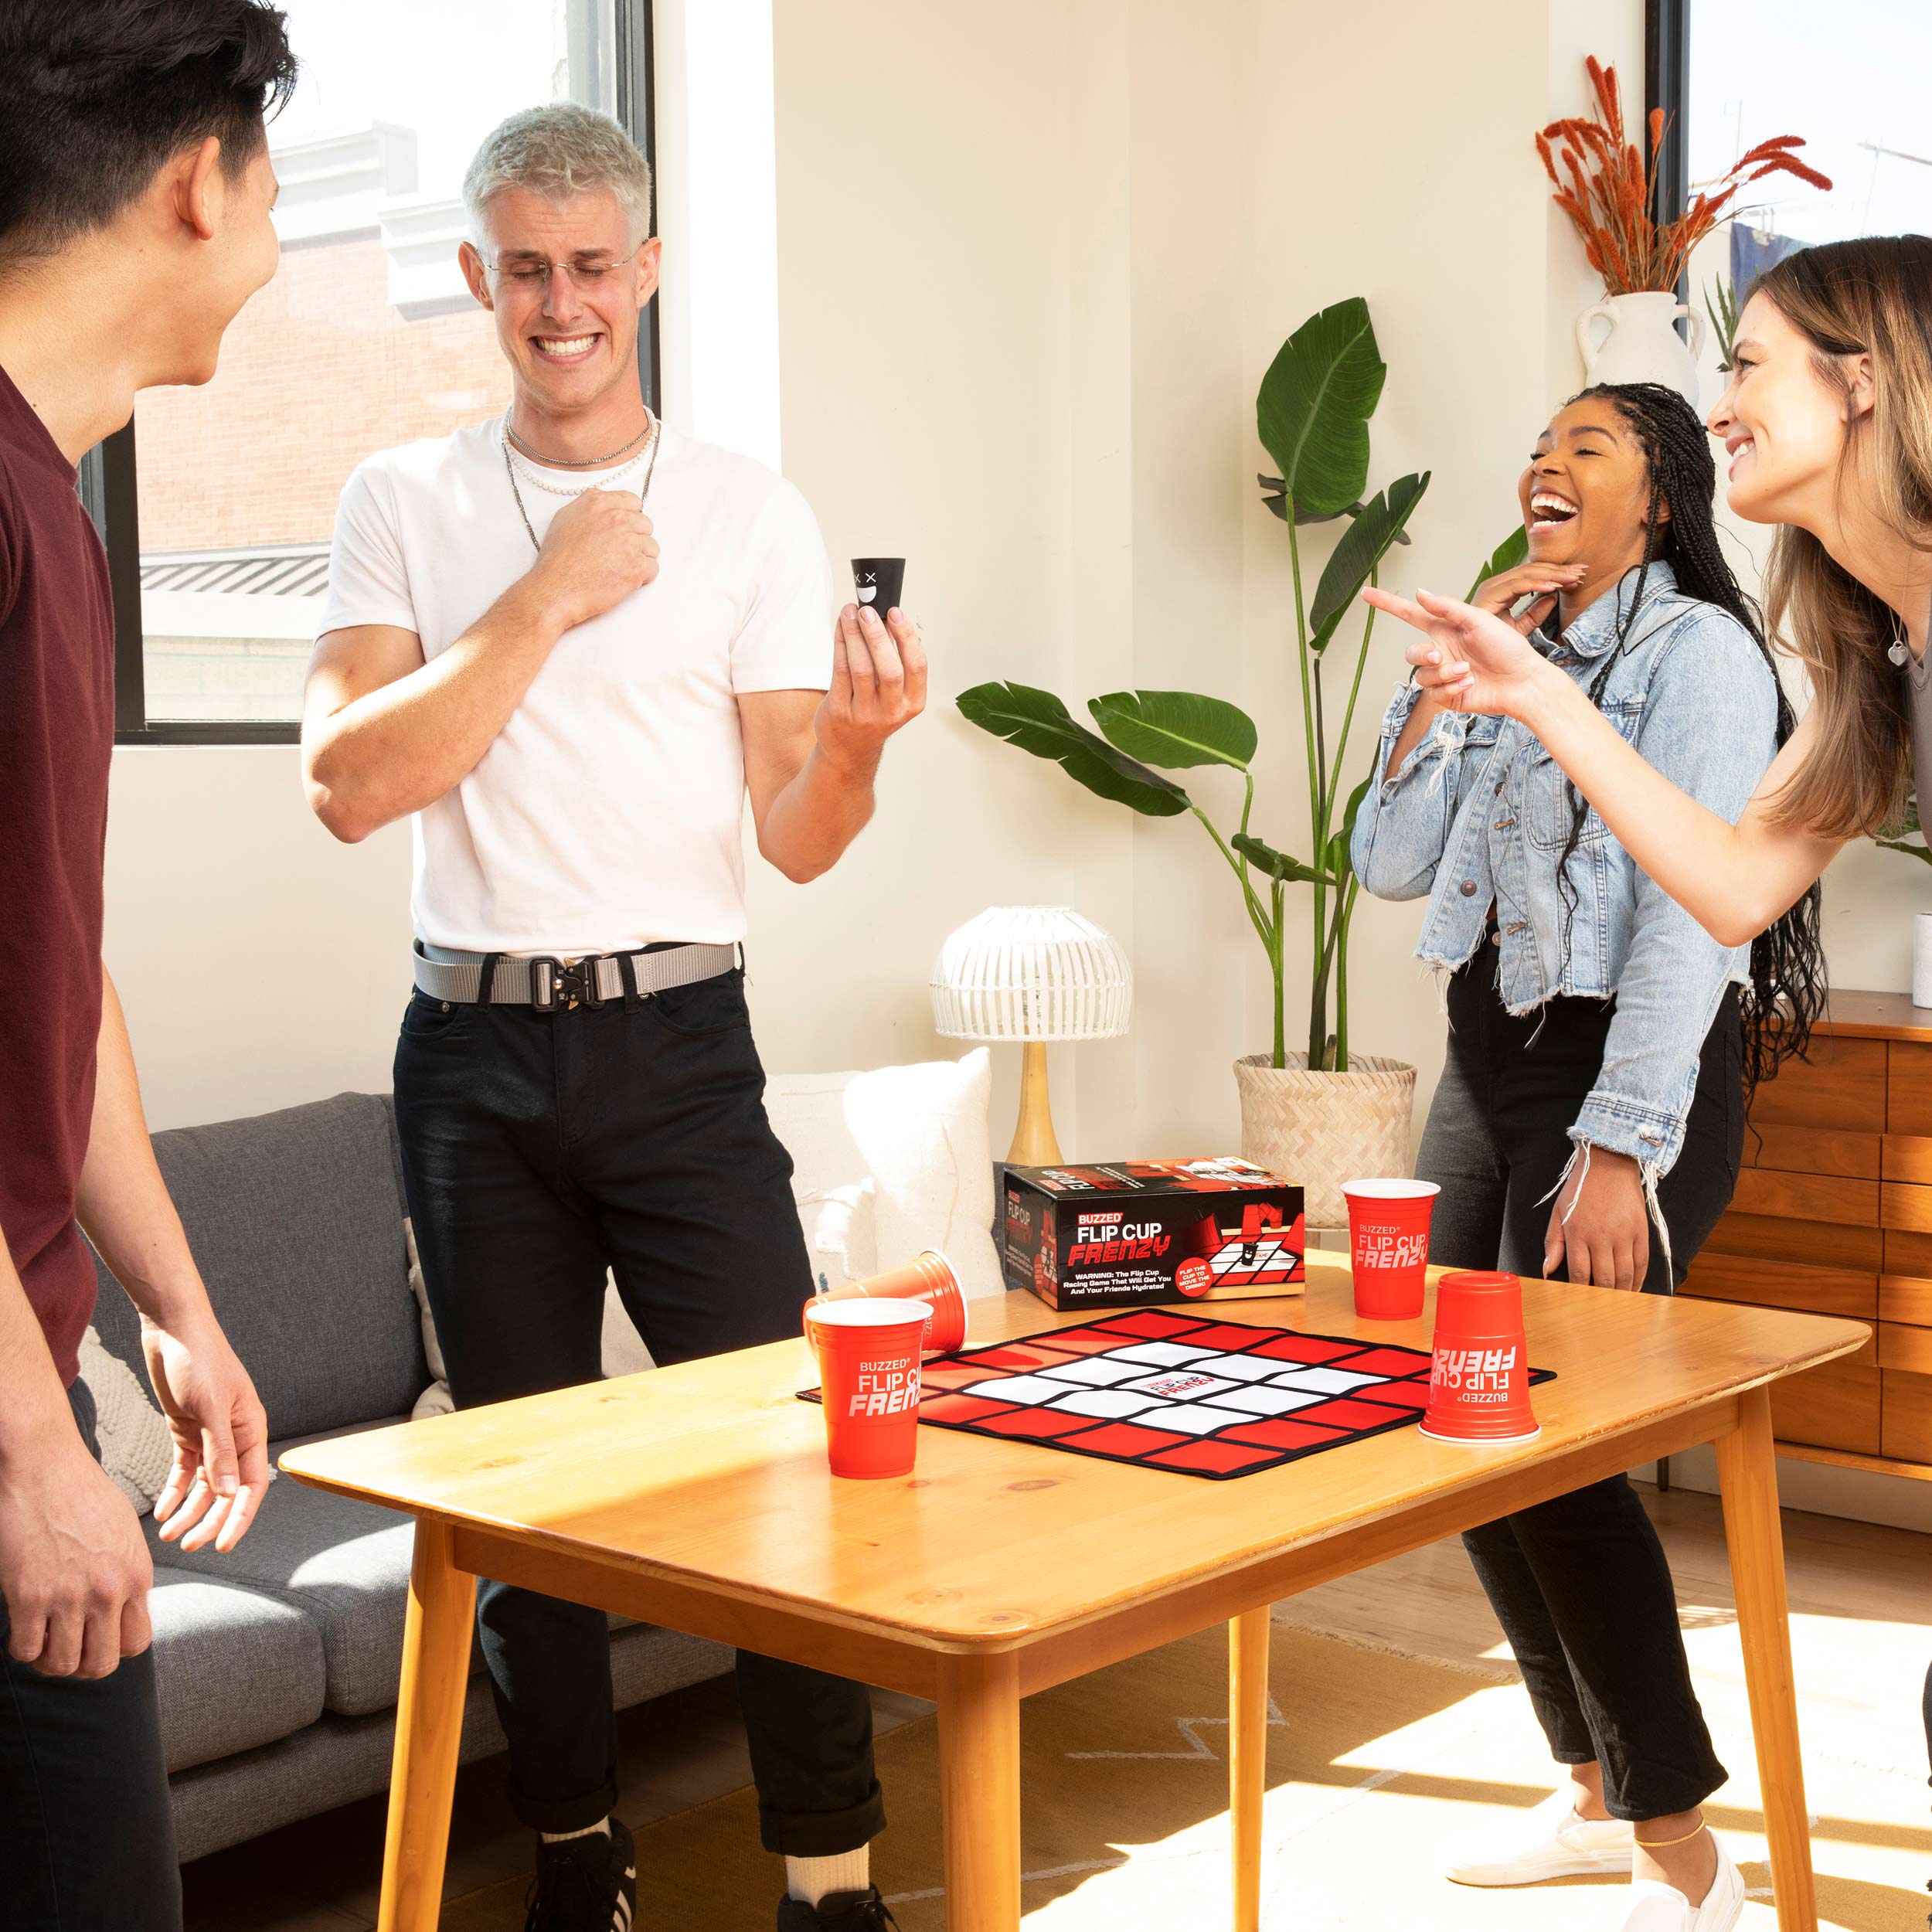 buzzed-flip-cup-frenzy-game-box-and-game-play-06-what-do-you-meme-by-relatable